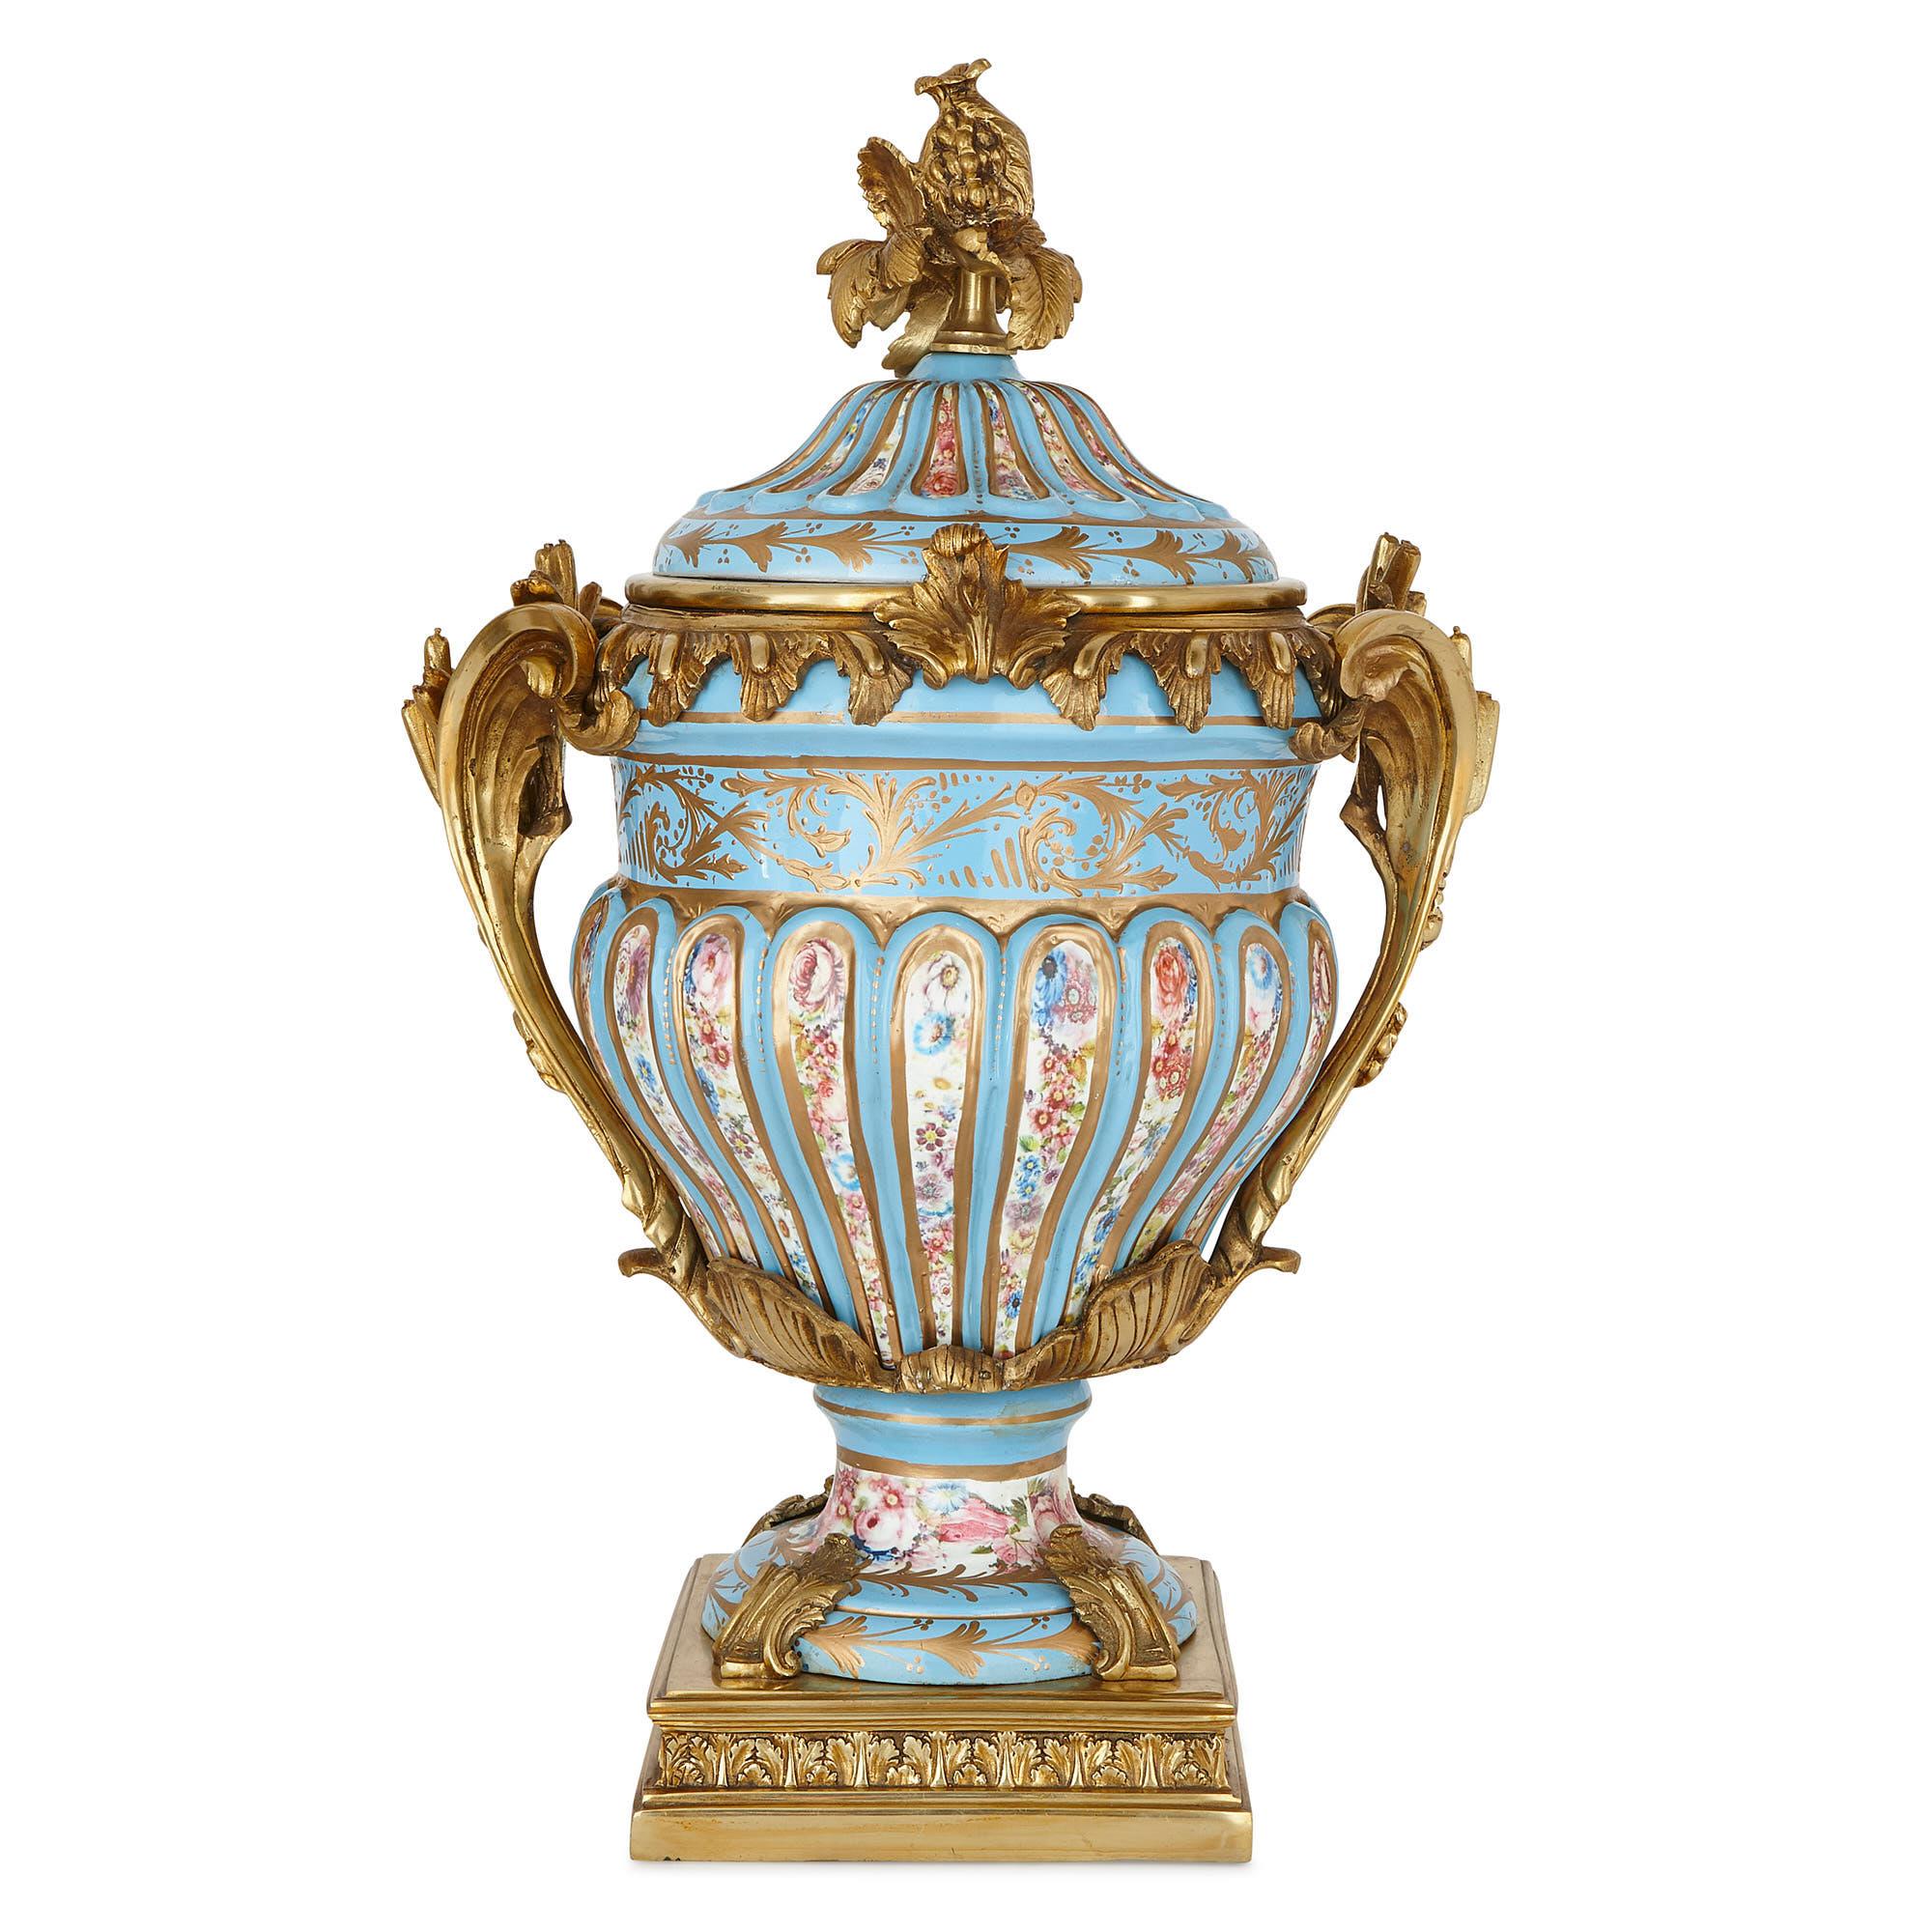 This exquisite pair of sky blue porcelain vases feature colourful paintings of flowers and parcel gilt motifs, enhanced with elaborate gilt bronze mounts. The pair take the form of classical kraters, with their wide upper bodies, necks and mouths.